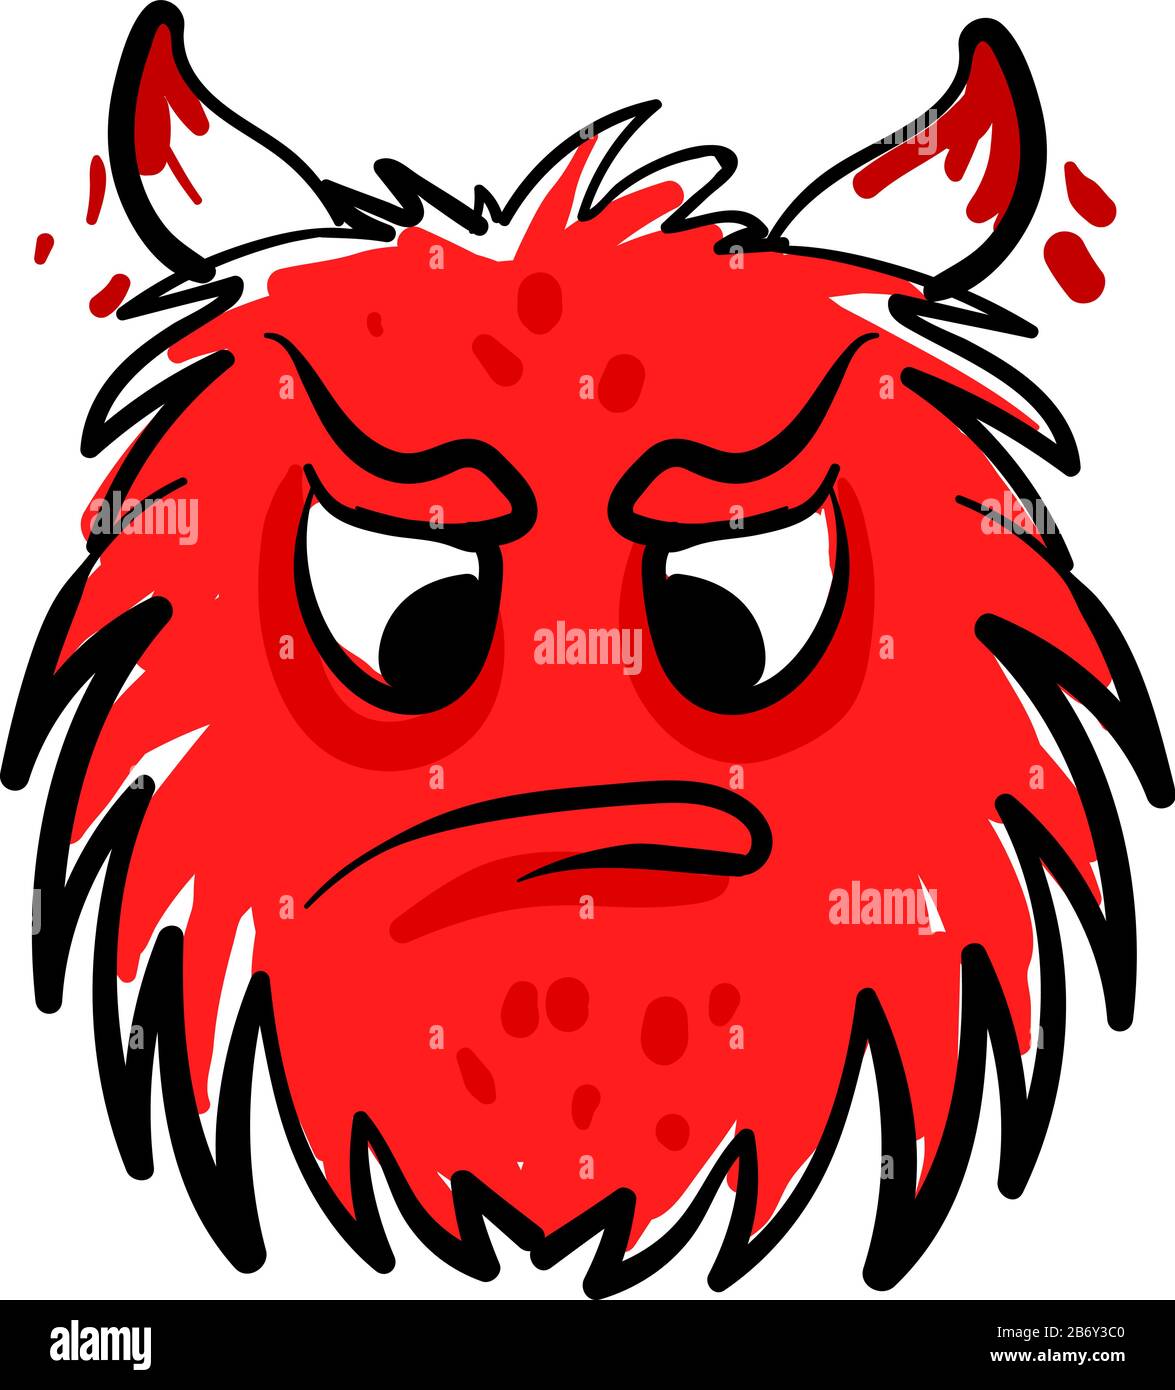 Red angry monster, illustration, vector on white background. Stock Vector